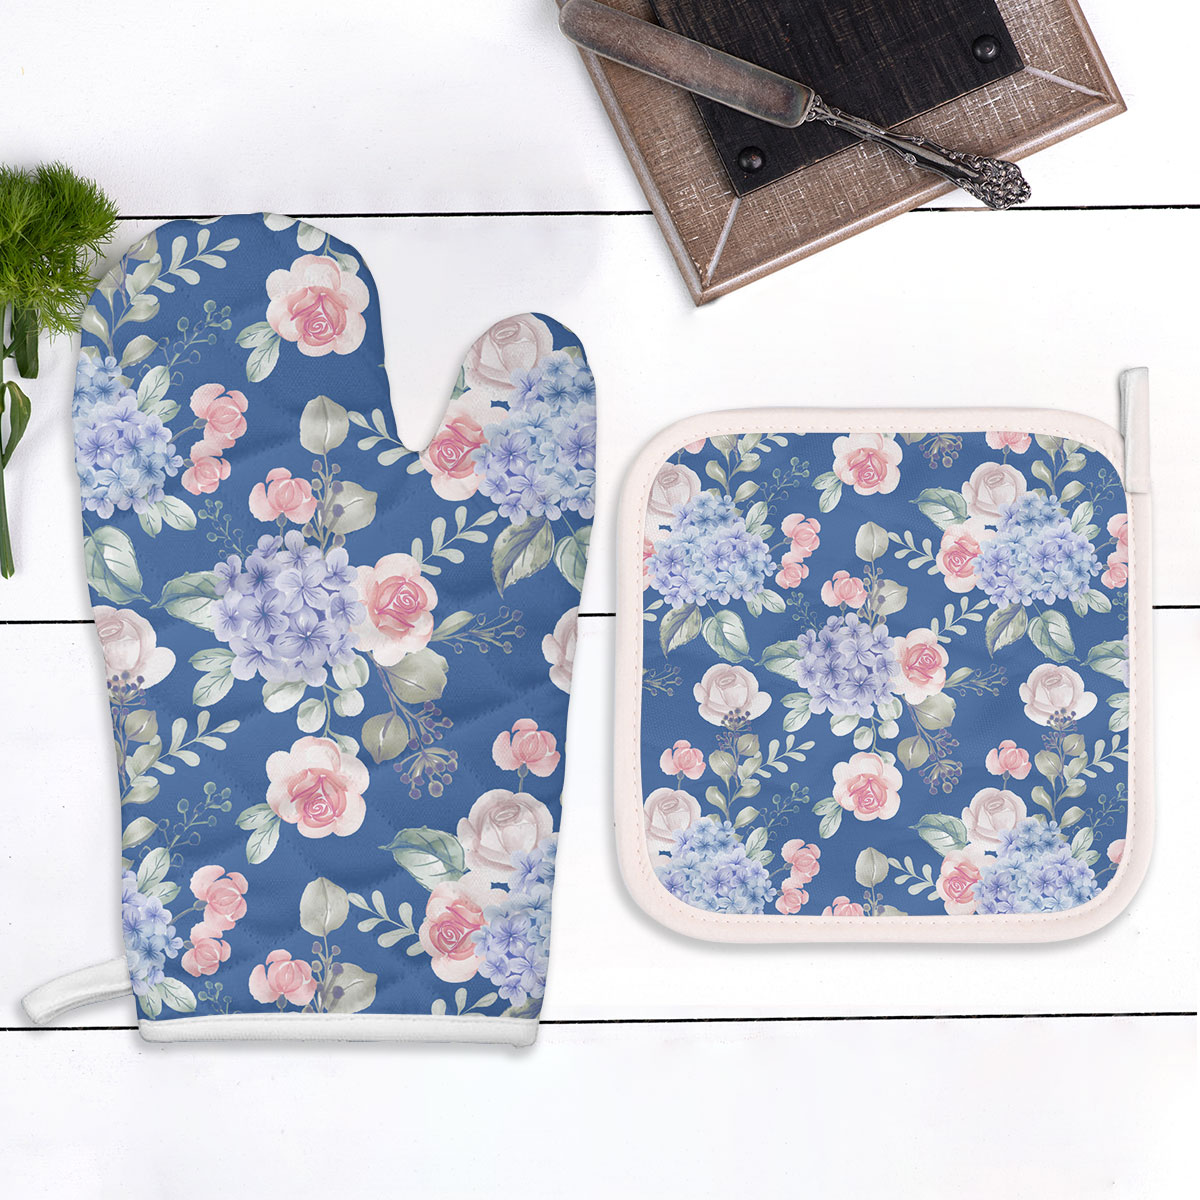 Watercolor Flower Hydrangea And Leaves Blue Oven Mitts Pot Holder Set